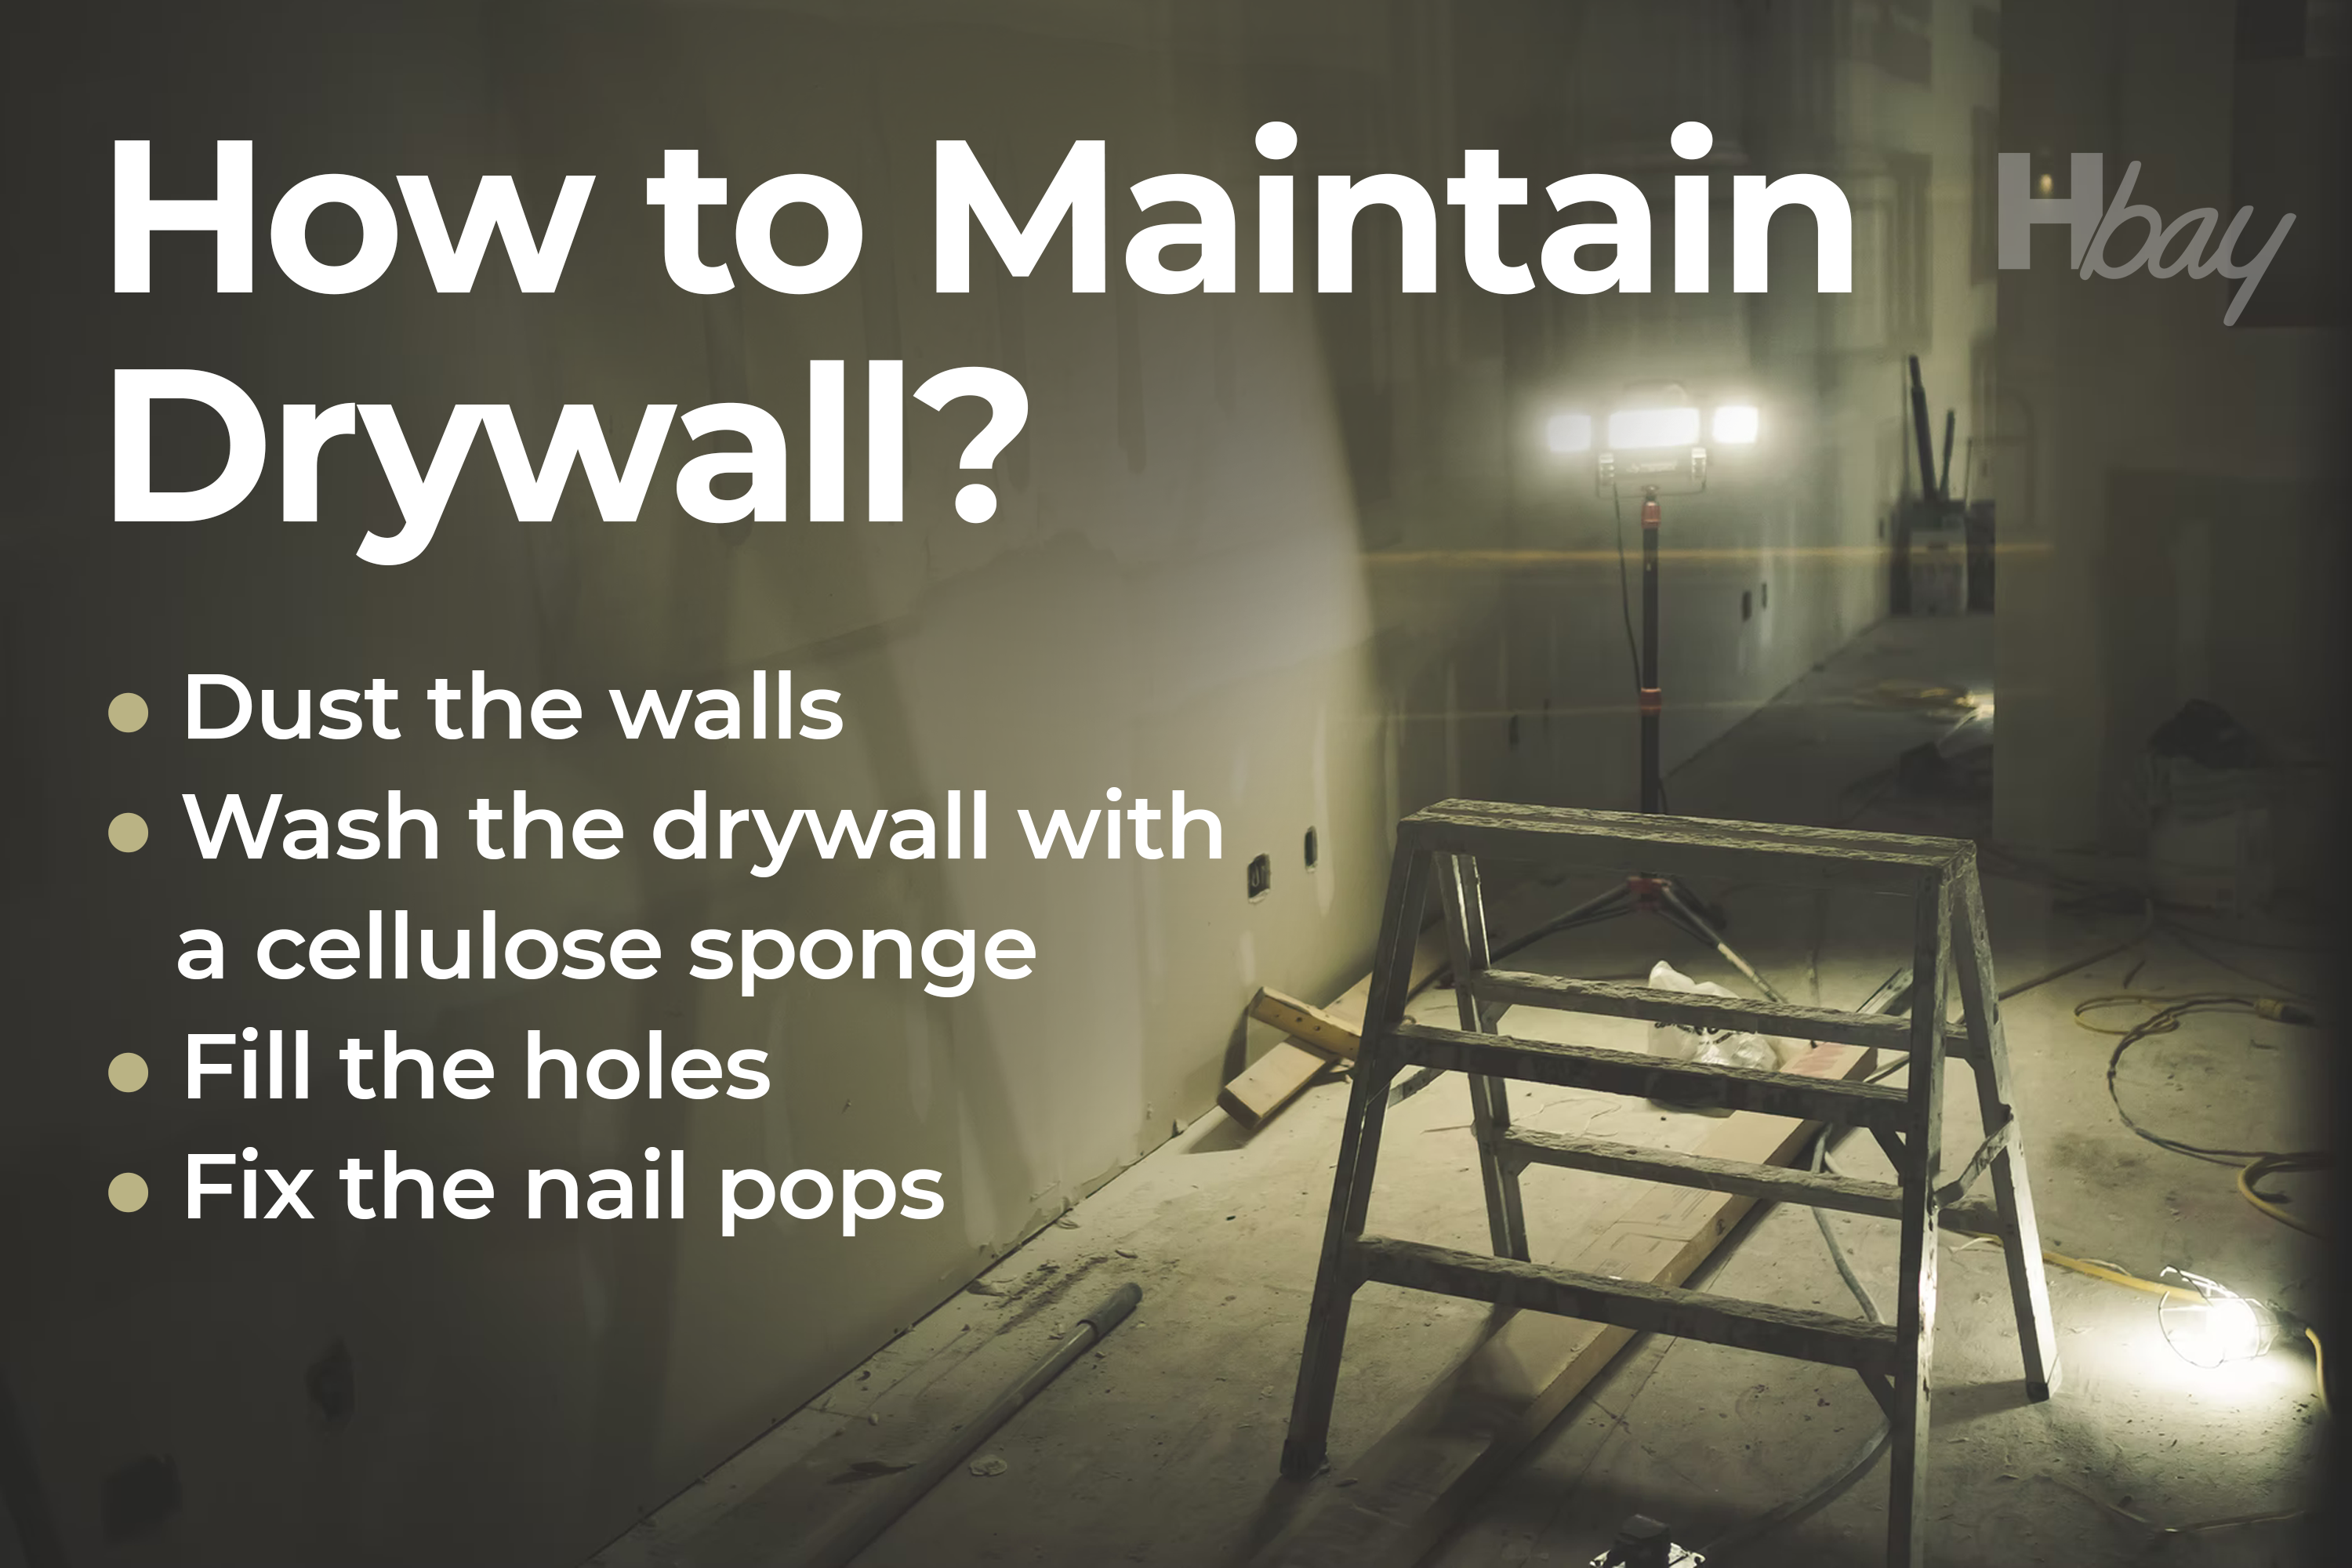 How to Maintain Drywall